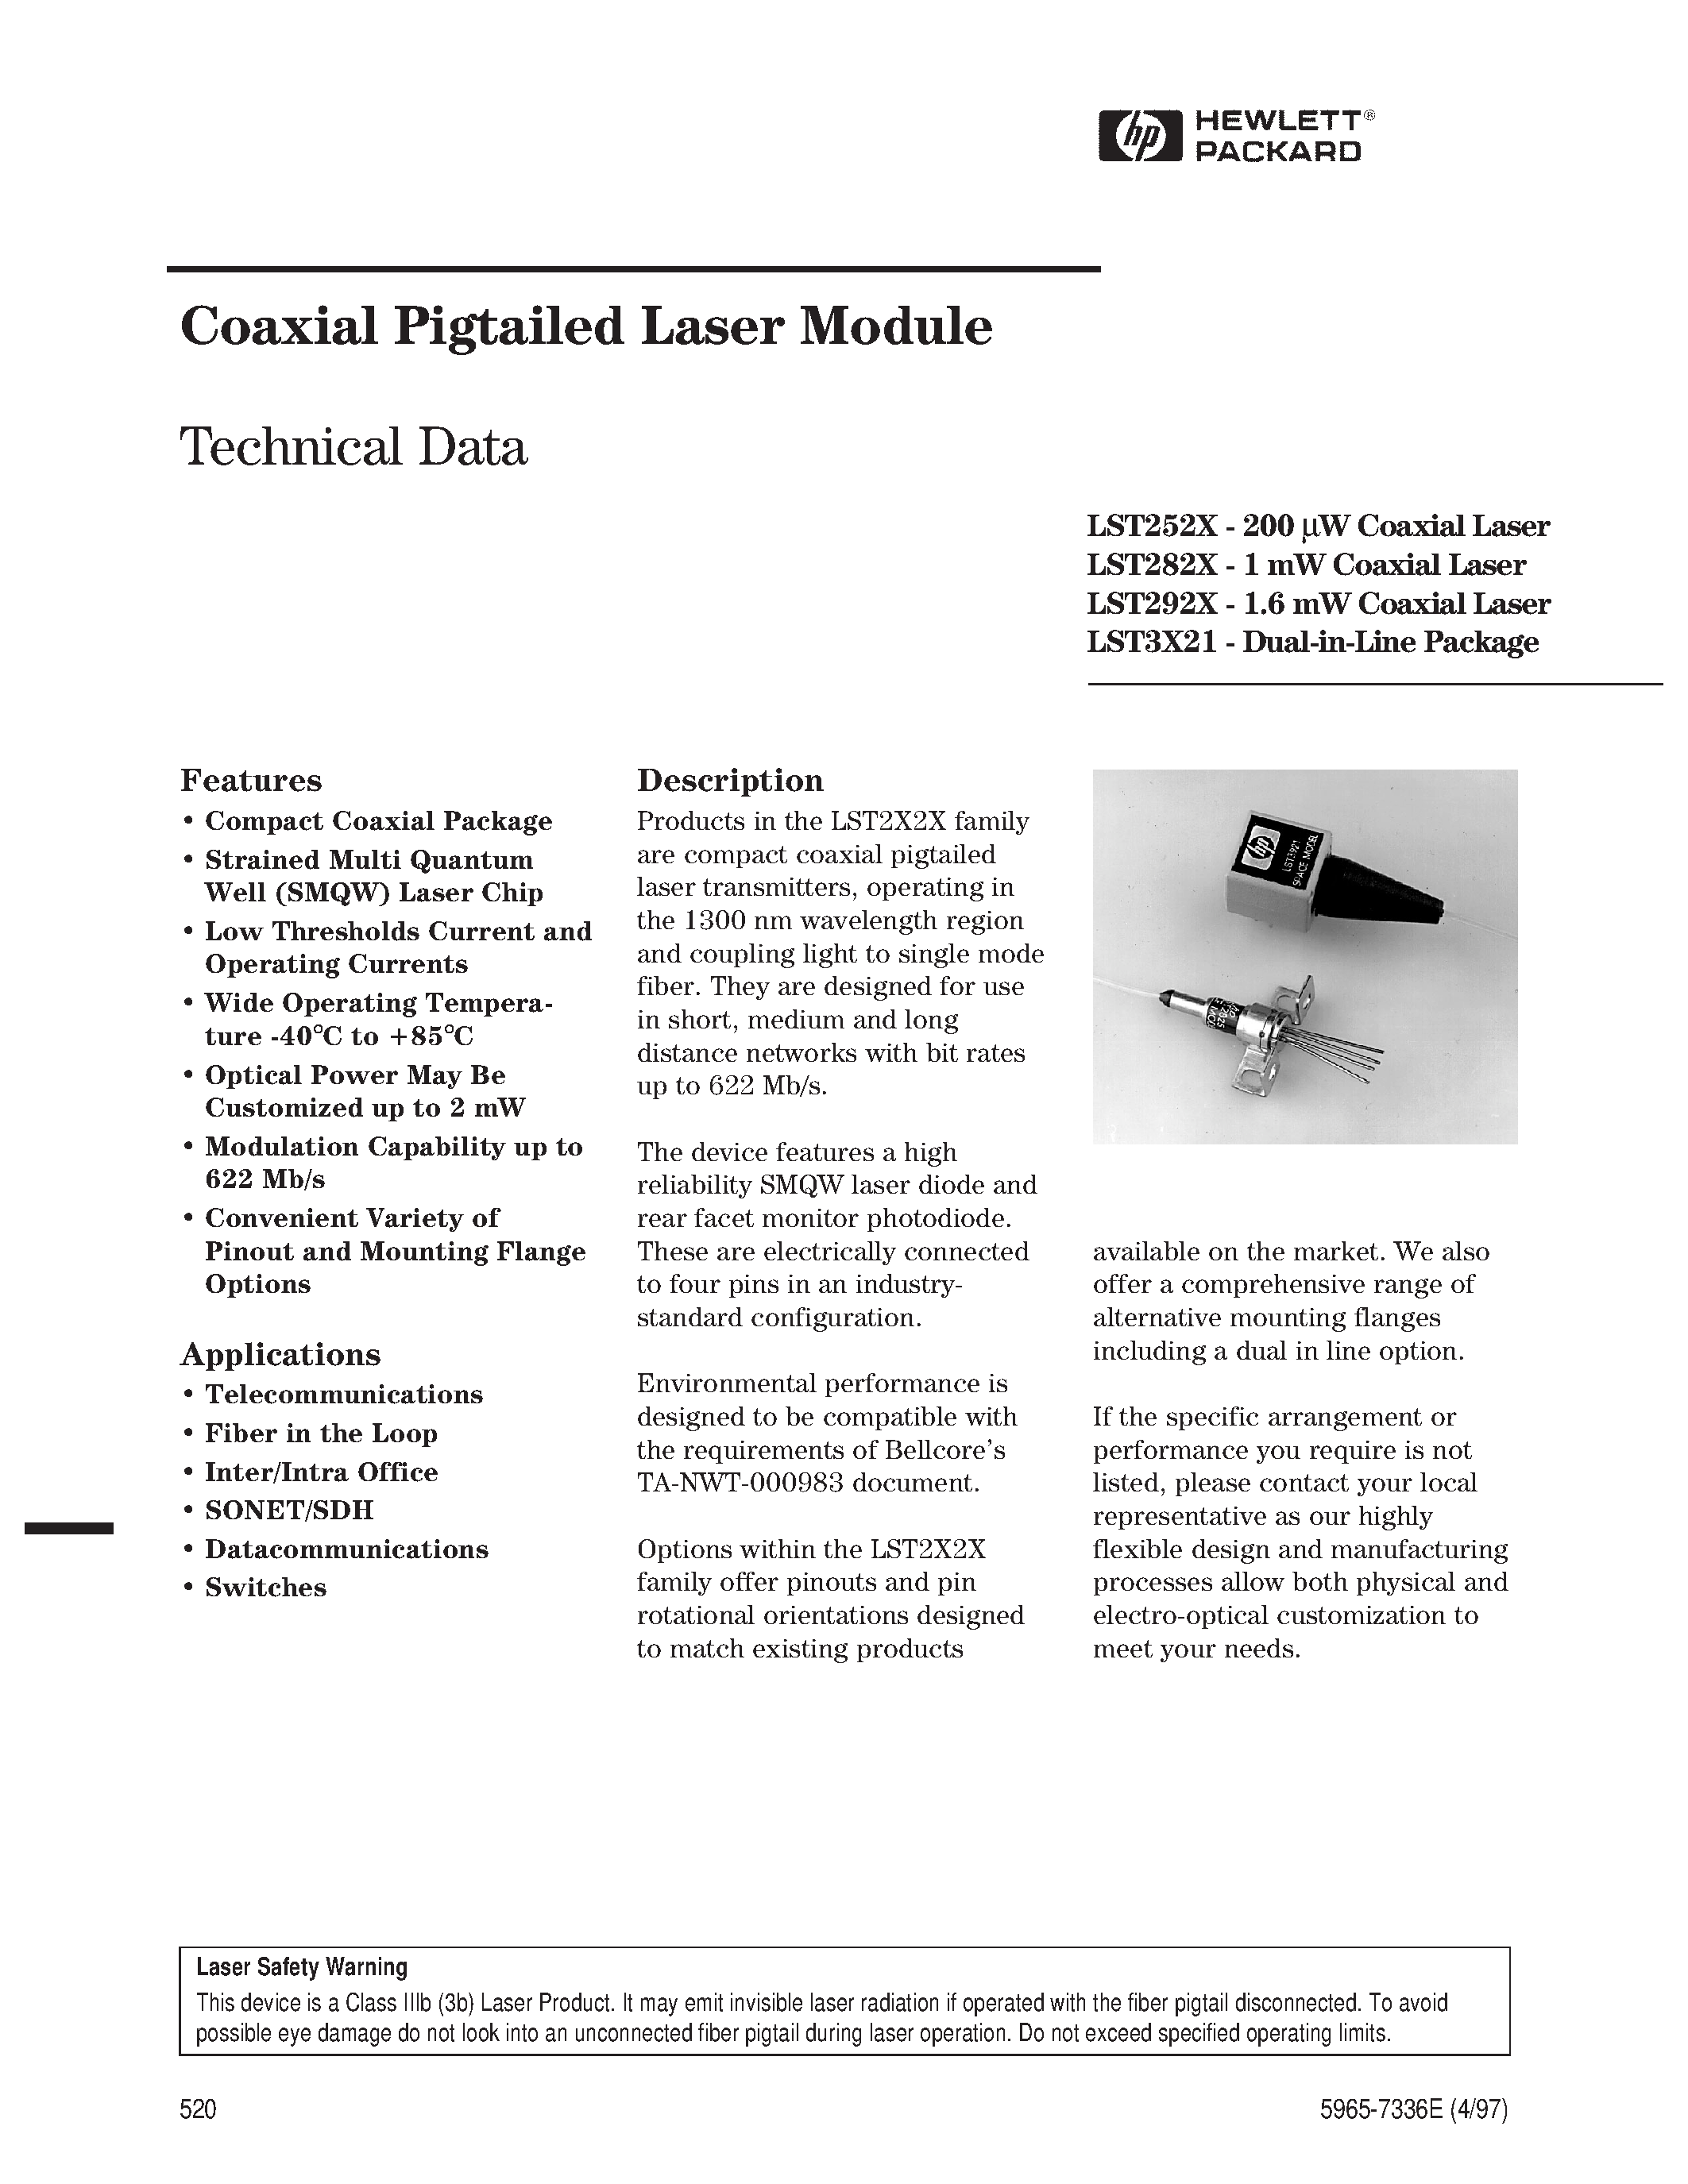 Даташит LST2525-S4-T-FP - Coaxial Pigtailed Laser Module страница 1